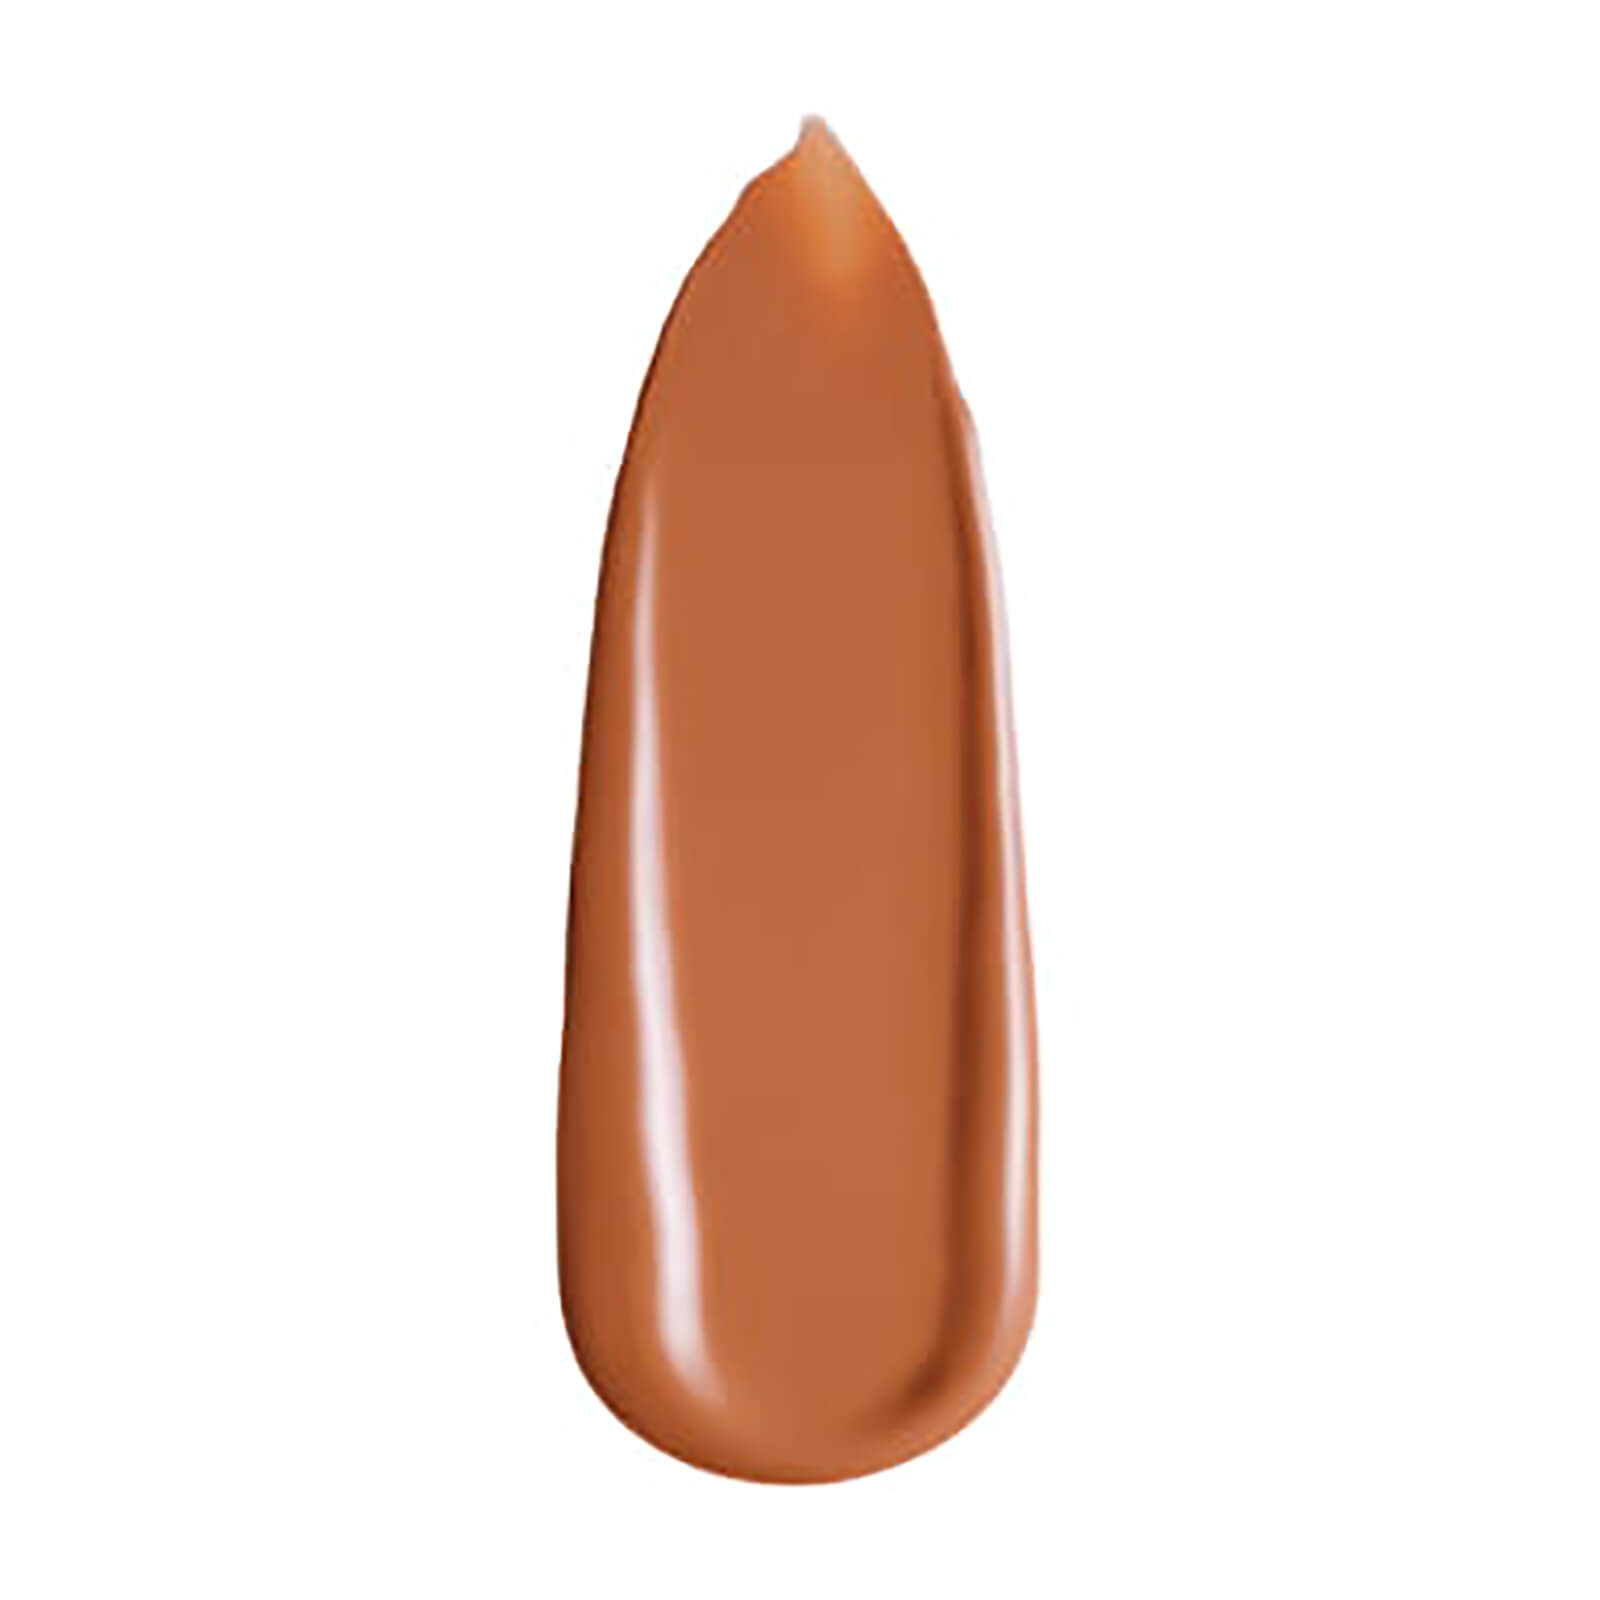 Clinique Even Better Glow™ Light Reflecting Makeup SPF15 30ml (Various Shades) - 92 Toasted Almond